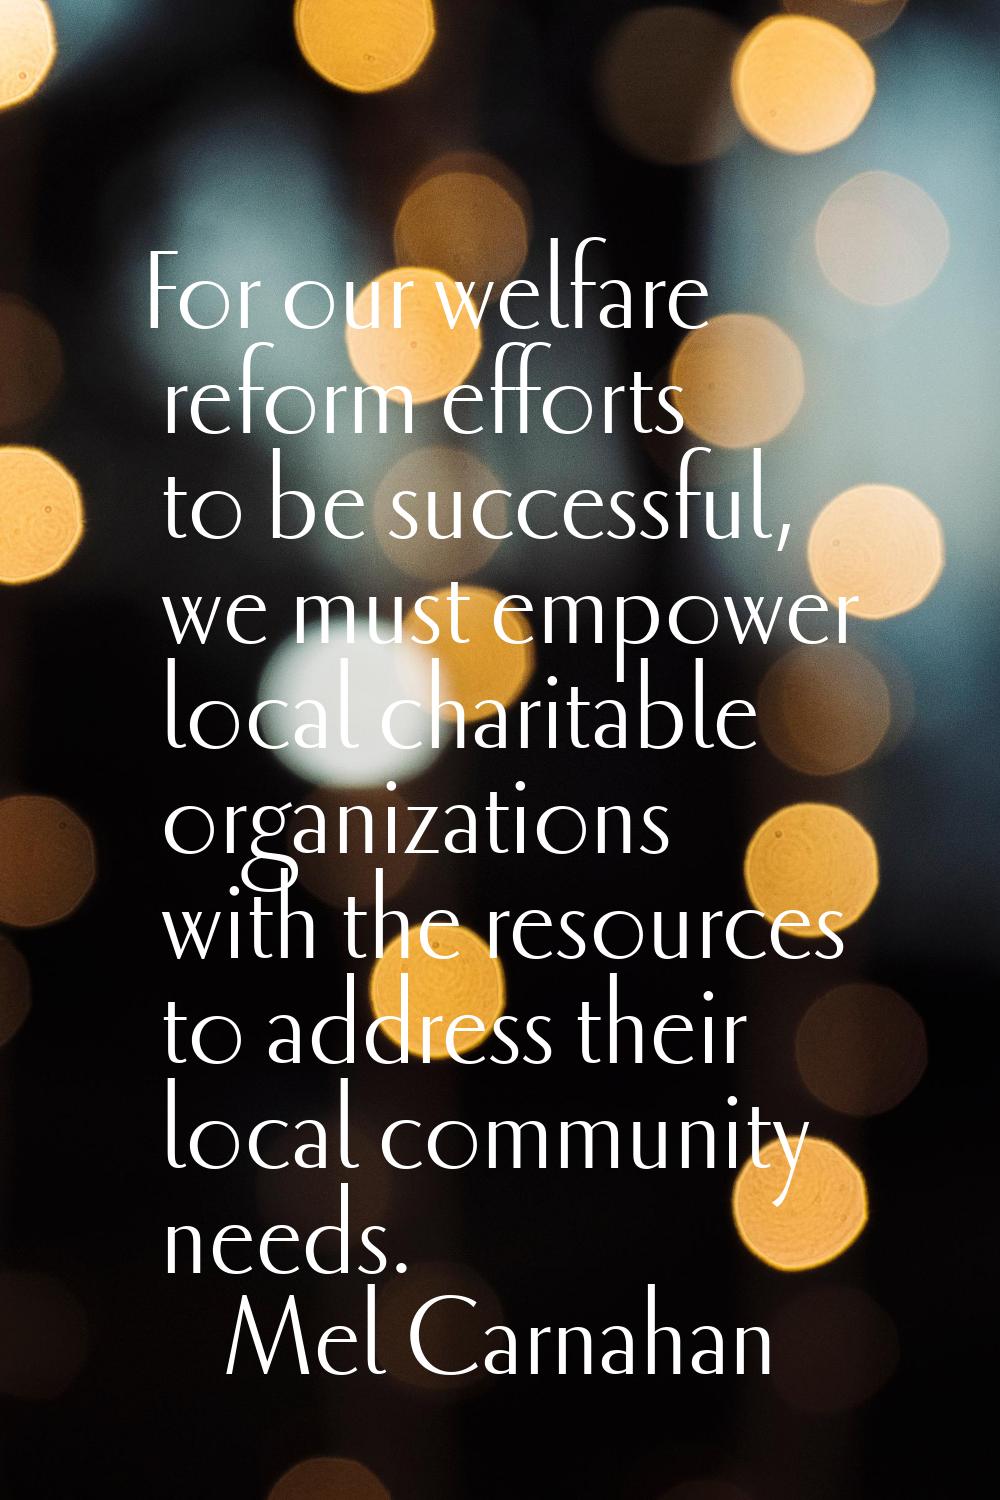 For our welfare reform efforts to be successful, we must empower local charitable organizations wit